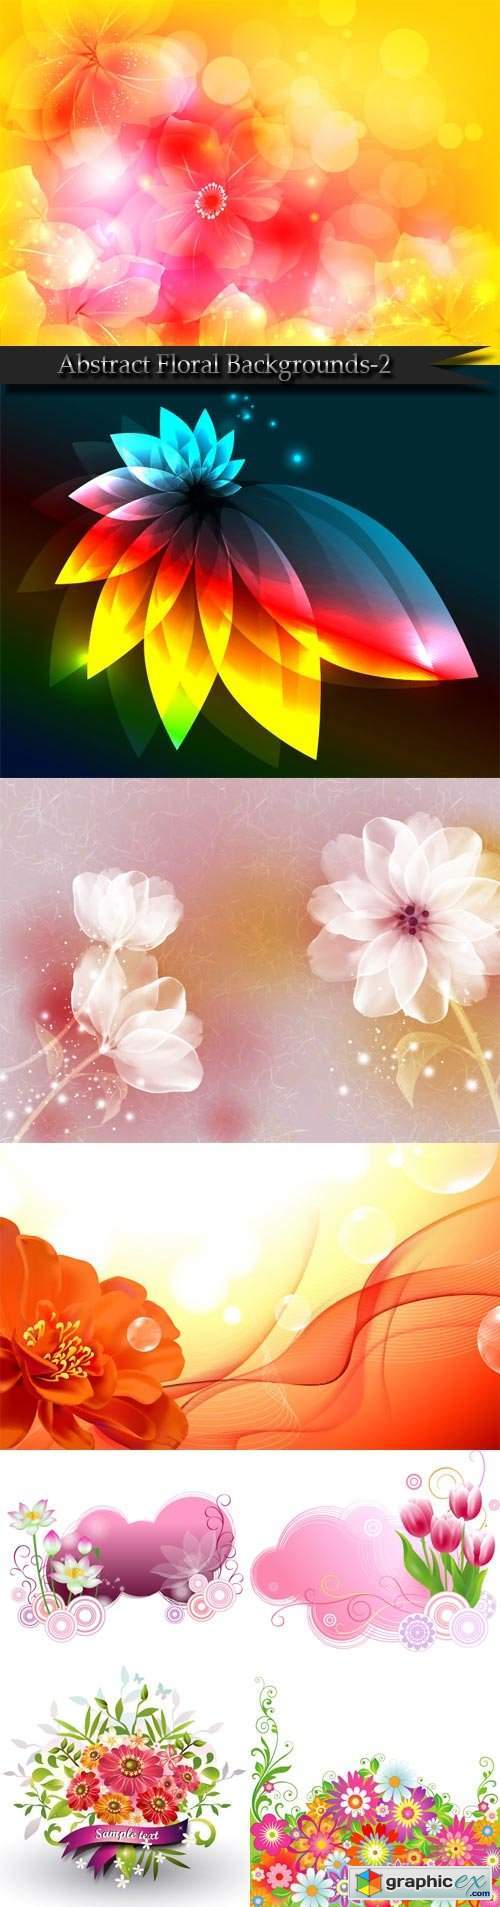 Abstract Floral Backgrounds-2